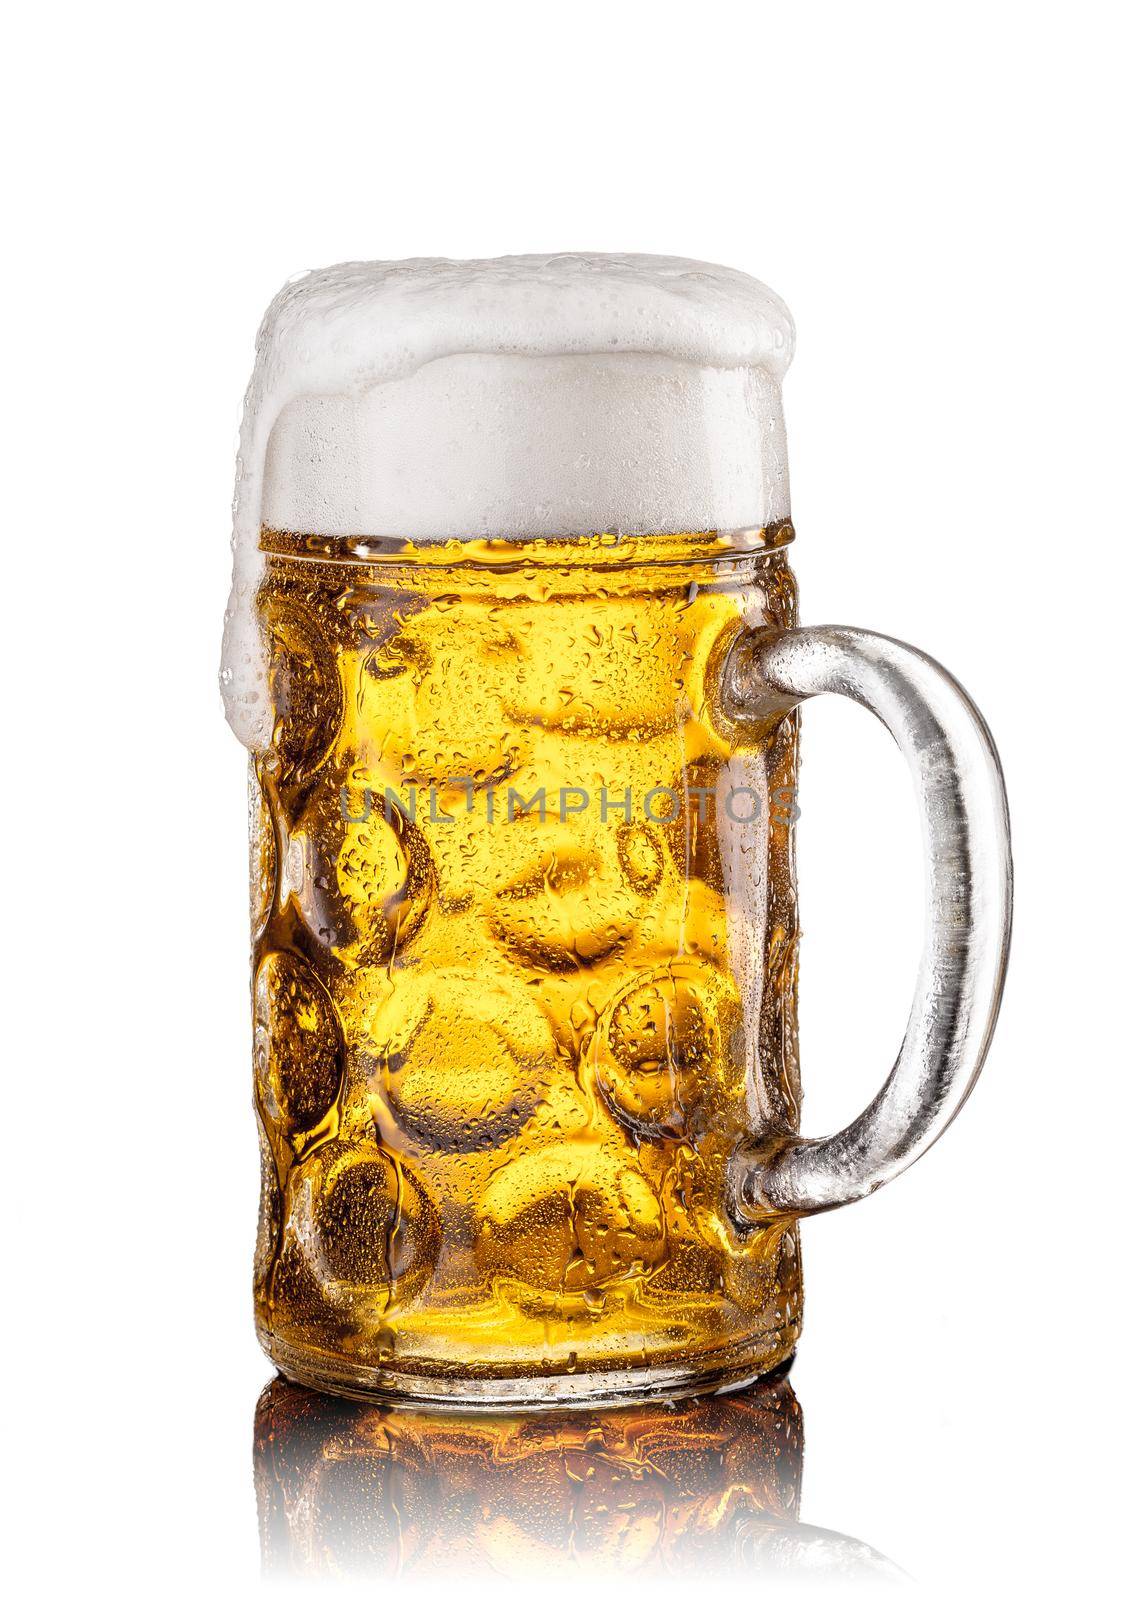 Mug with beer on white background. Beautiful foam and drops of moisture on a glass